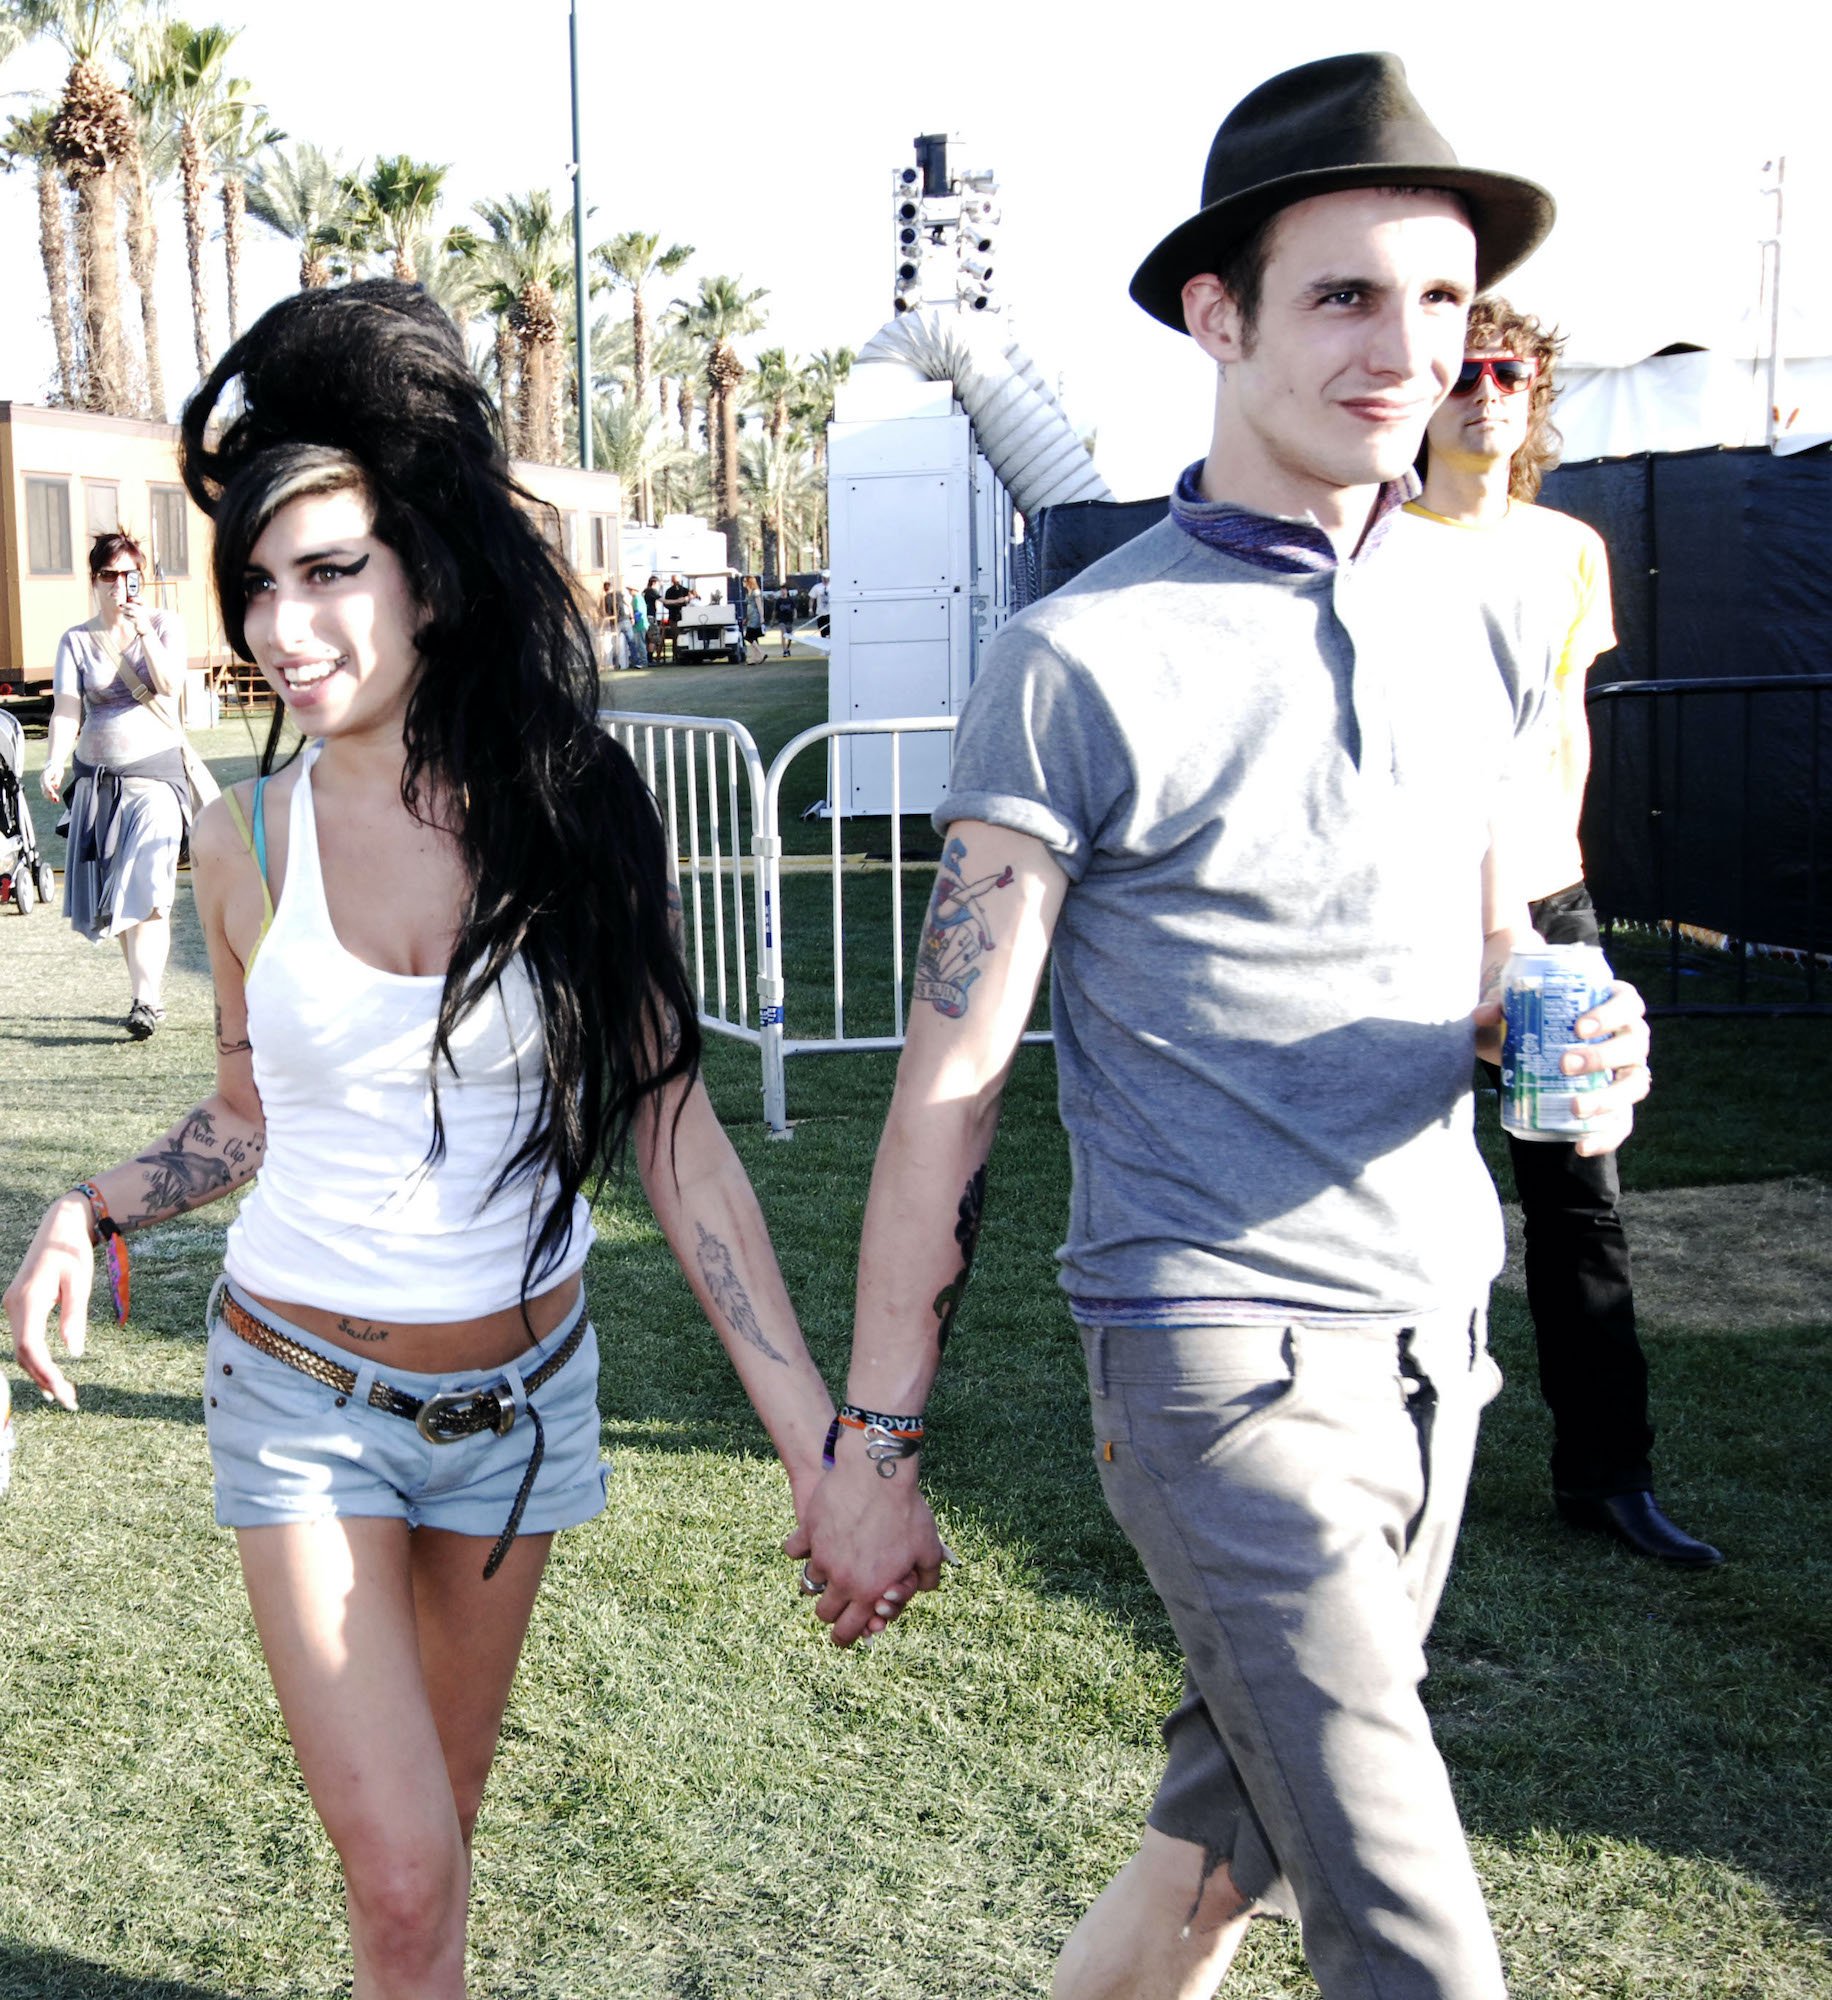 (L-R) Amy Winehouse and Blake Fielder-Civil smiling, holding hands